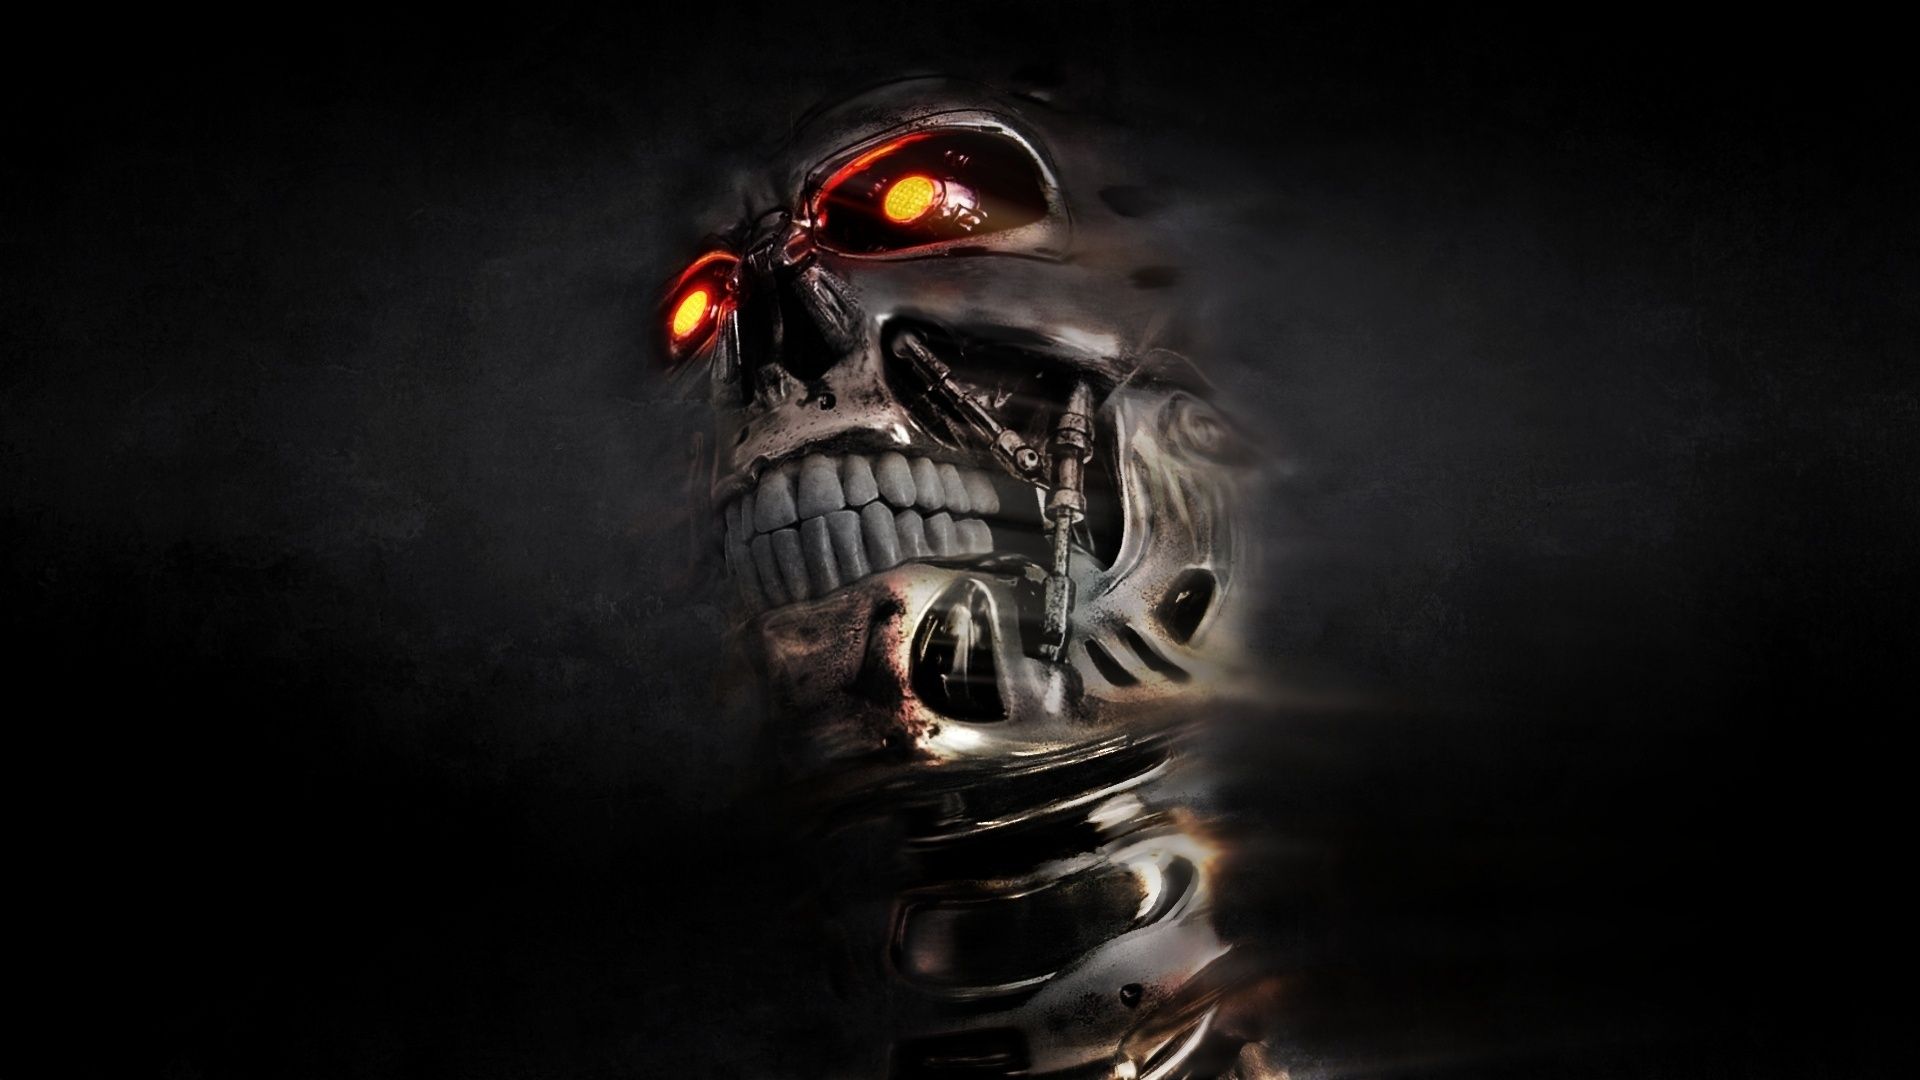 Skull Wallpapers High Quality Download Free